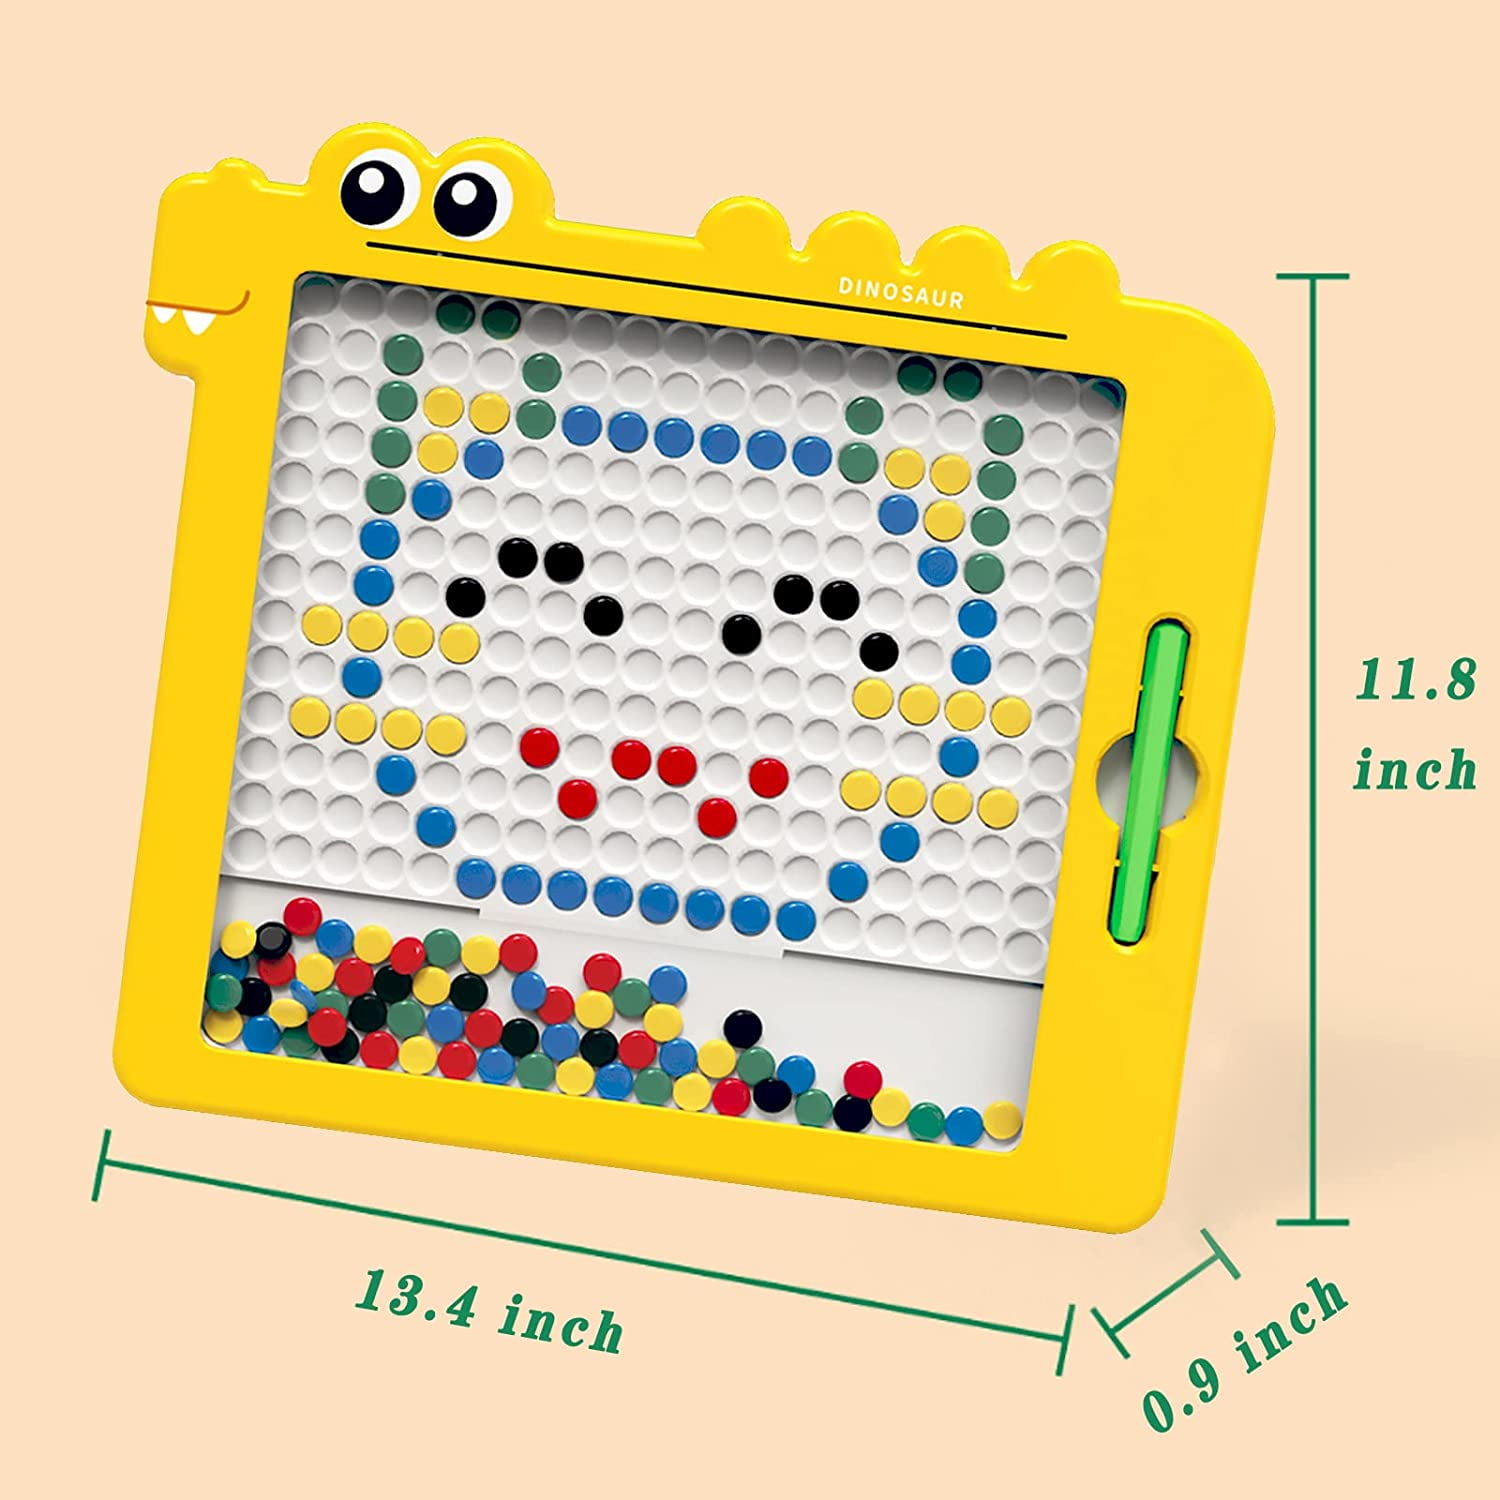 Autrucker Magnetic Drawing Board for Kids and Toddlers Age 3-5, Fun Magnetic Board with Colorful Beads and Drawing Stylus( 8 x 9 inches)